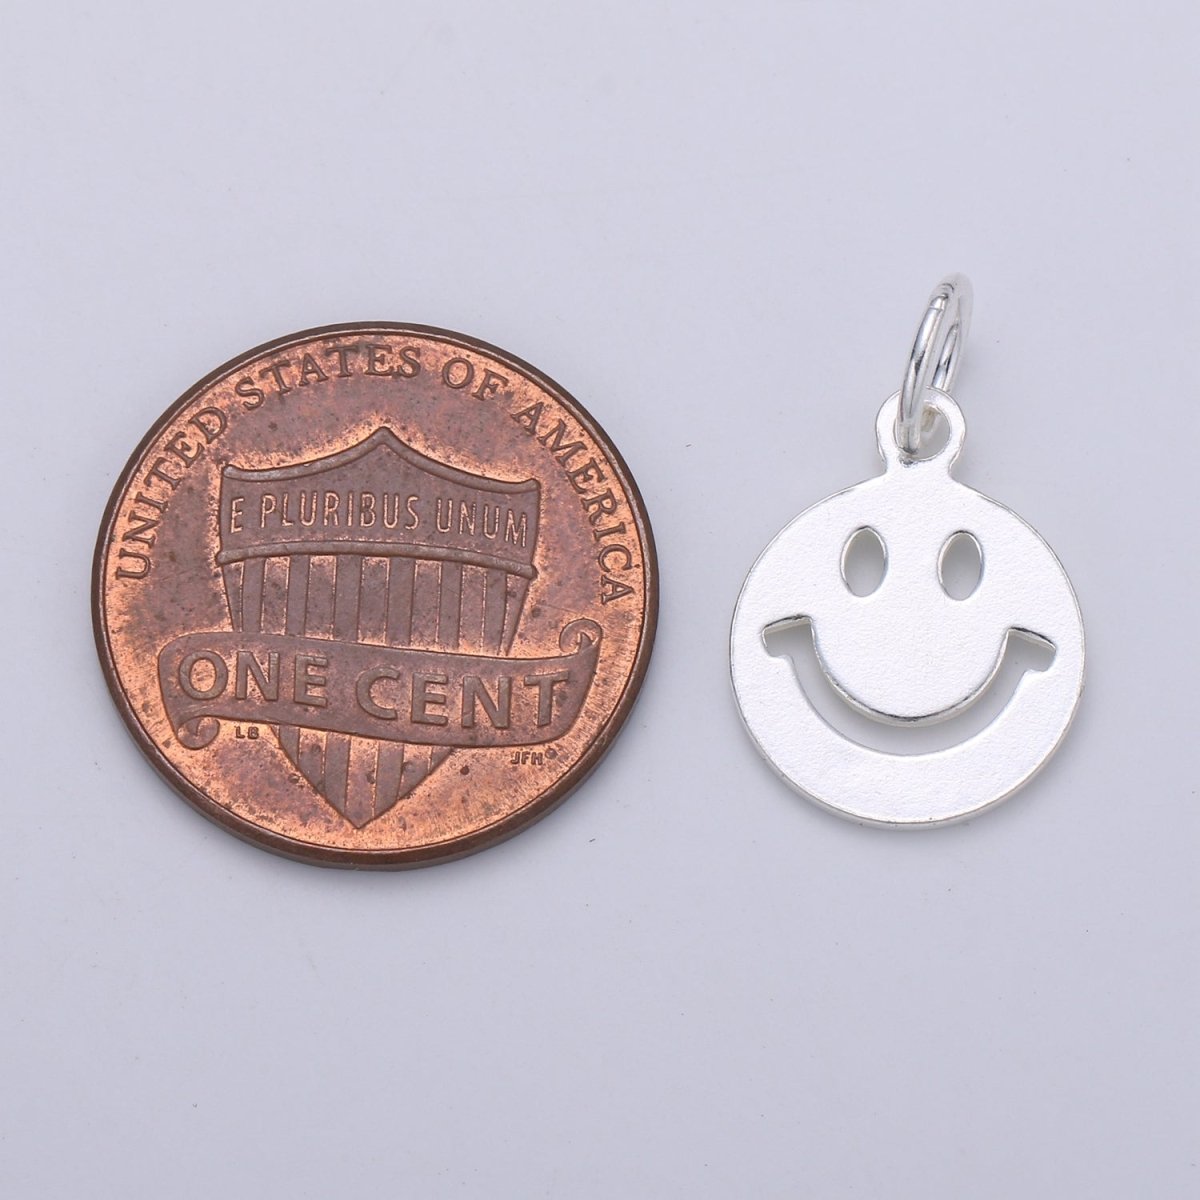 925 Sterling Silver Happy Face Charm, Message Charm Silver Happy Face Charm for Necklace Bracelet Earring, Happy Charm SL-106 - DLUXCA